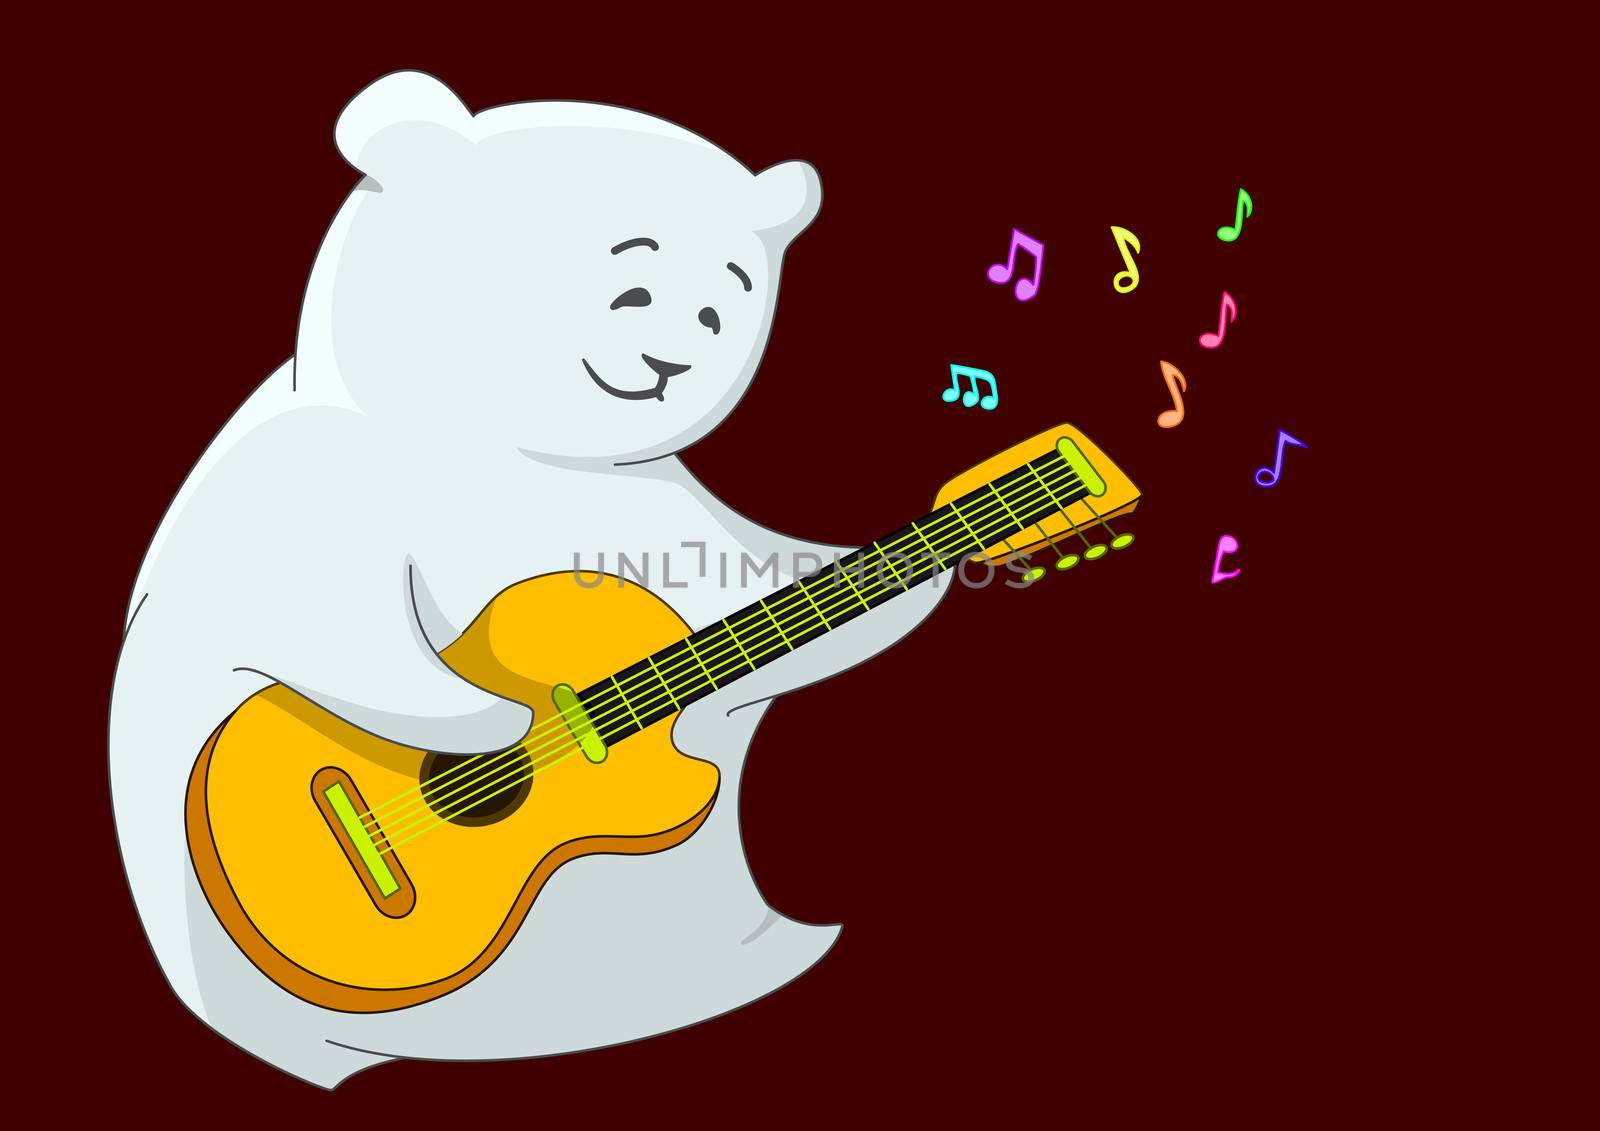 Teddy bear with guitar by alexcoolok